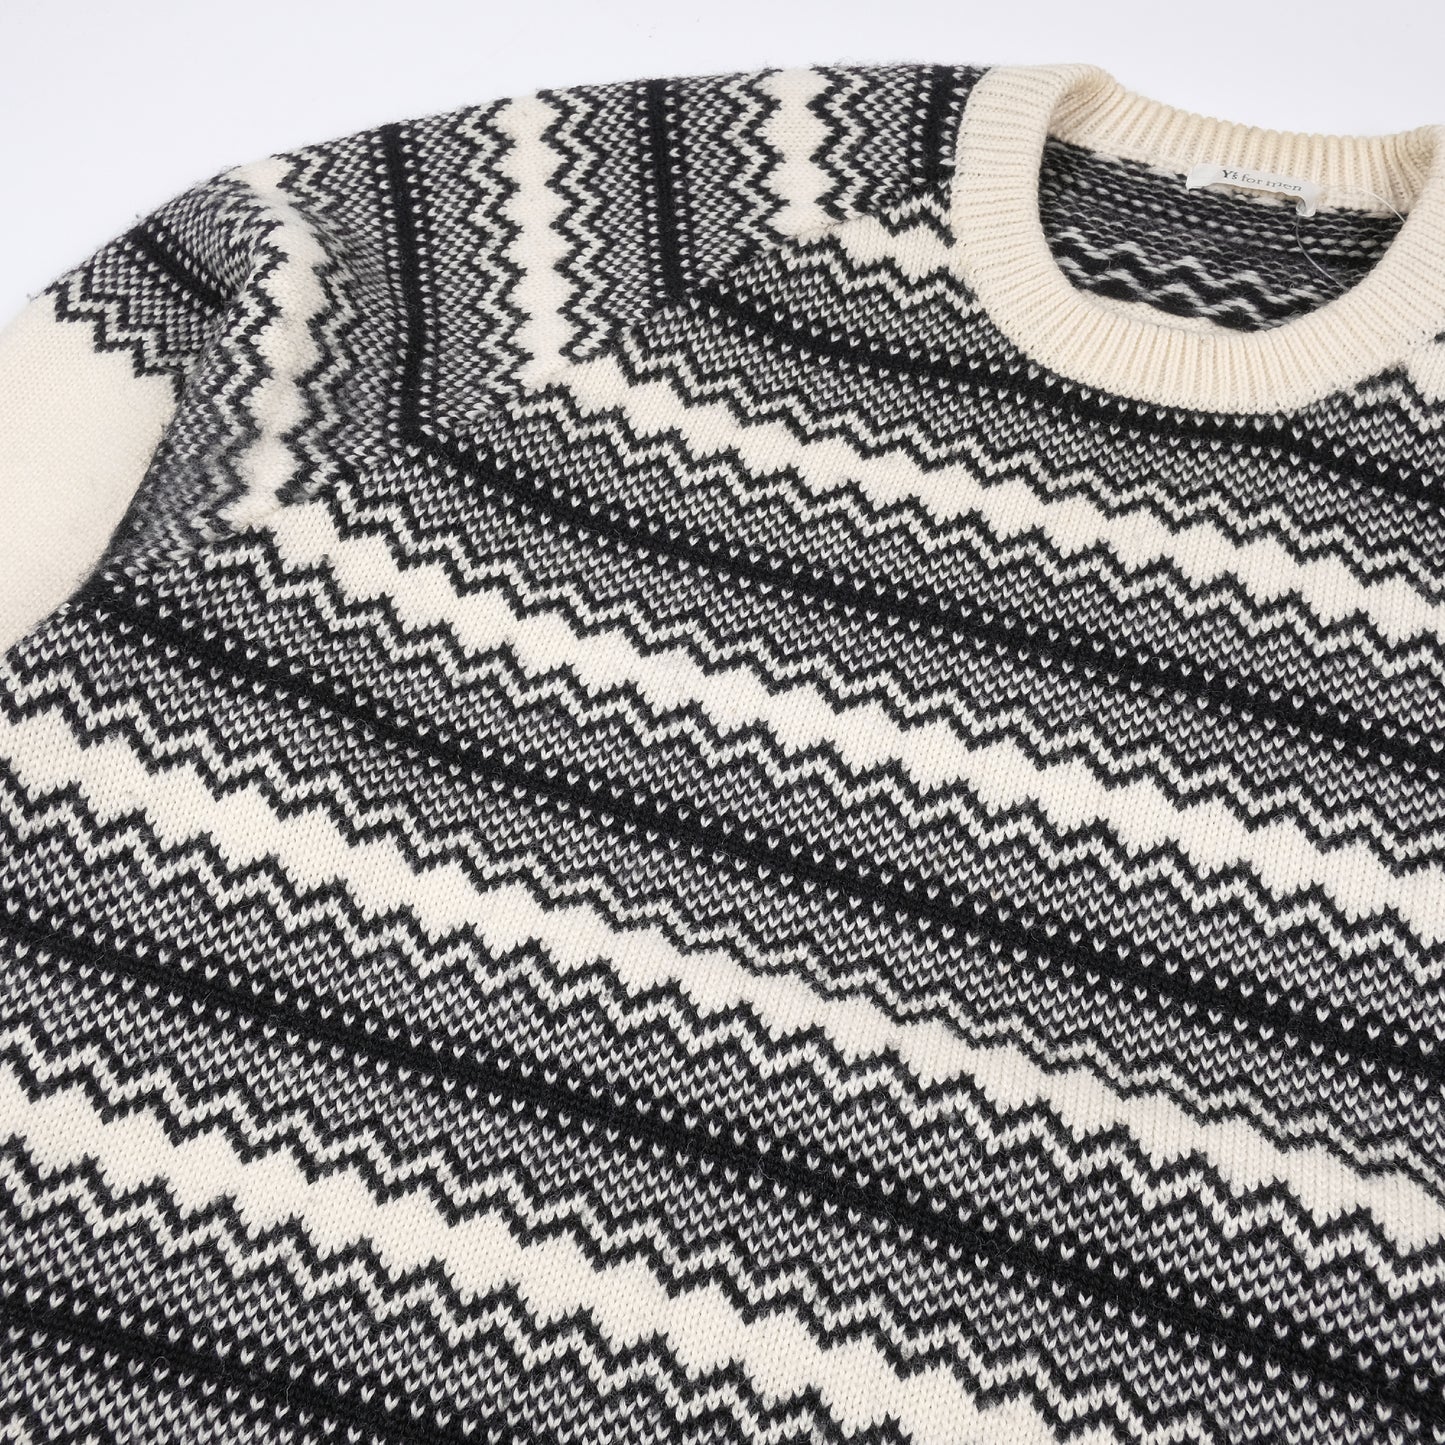 Y's for Men White Nordic Knit Sweater